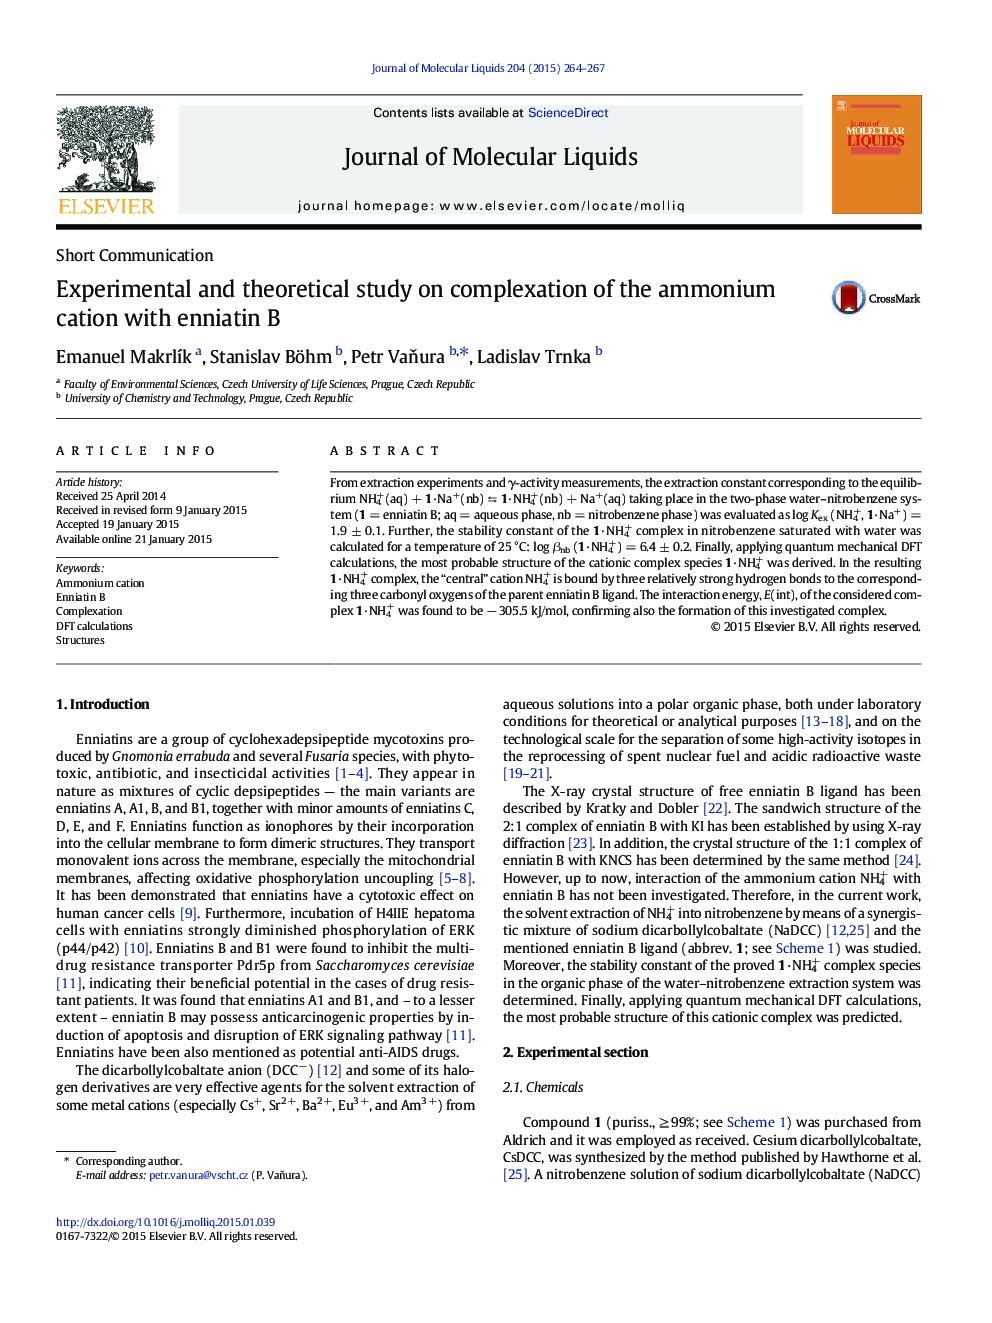 Short CommunicationExperimental and theoretical study on complexation of the ammonium cation with enniatin B